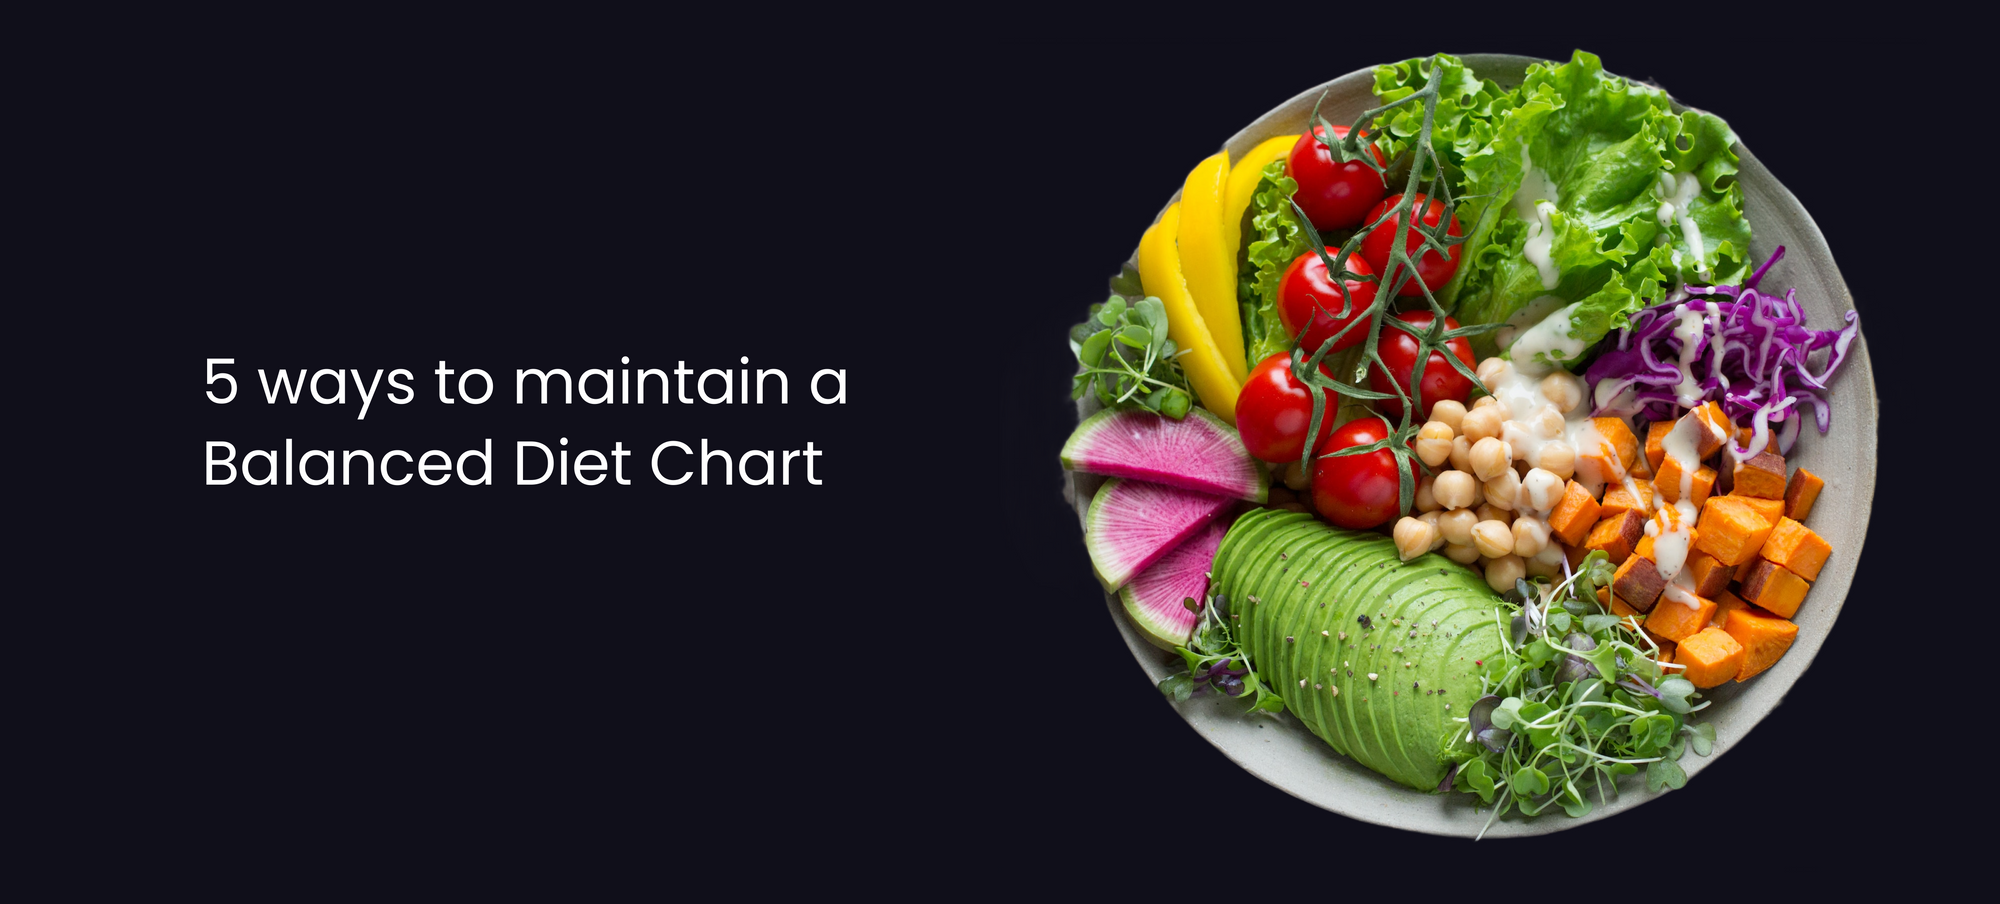 5 ways to maintain a Balanced Diet Chart